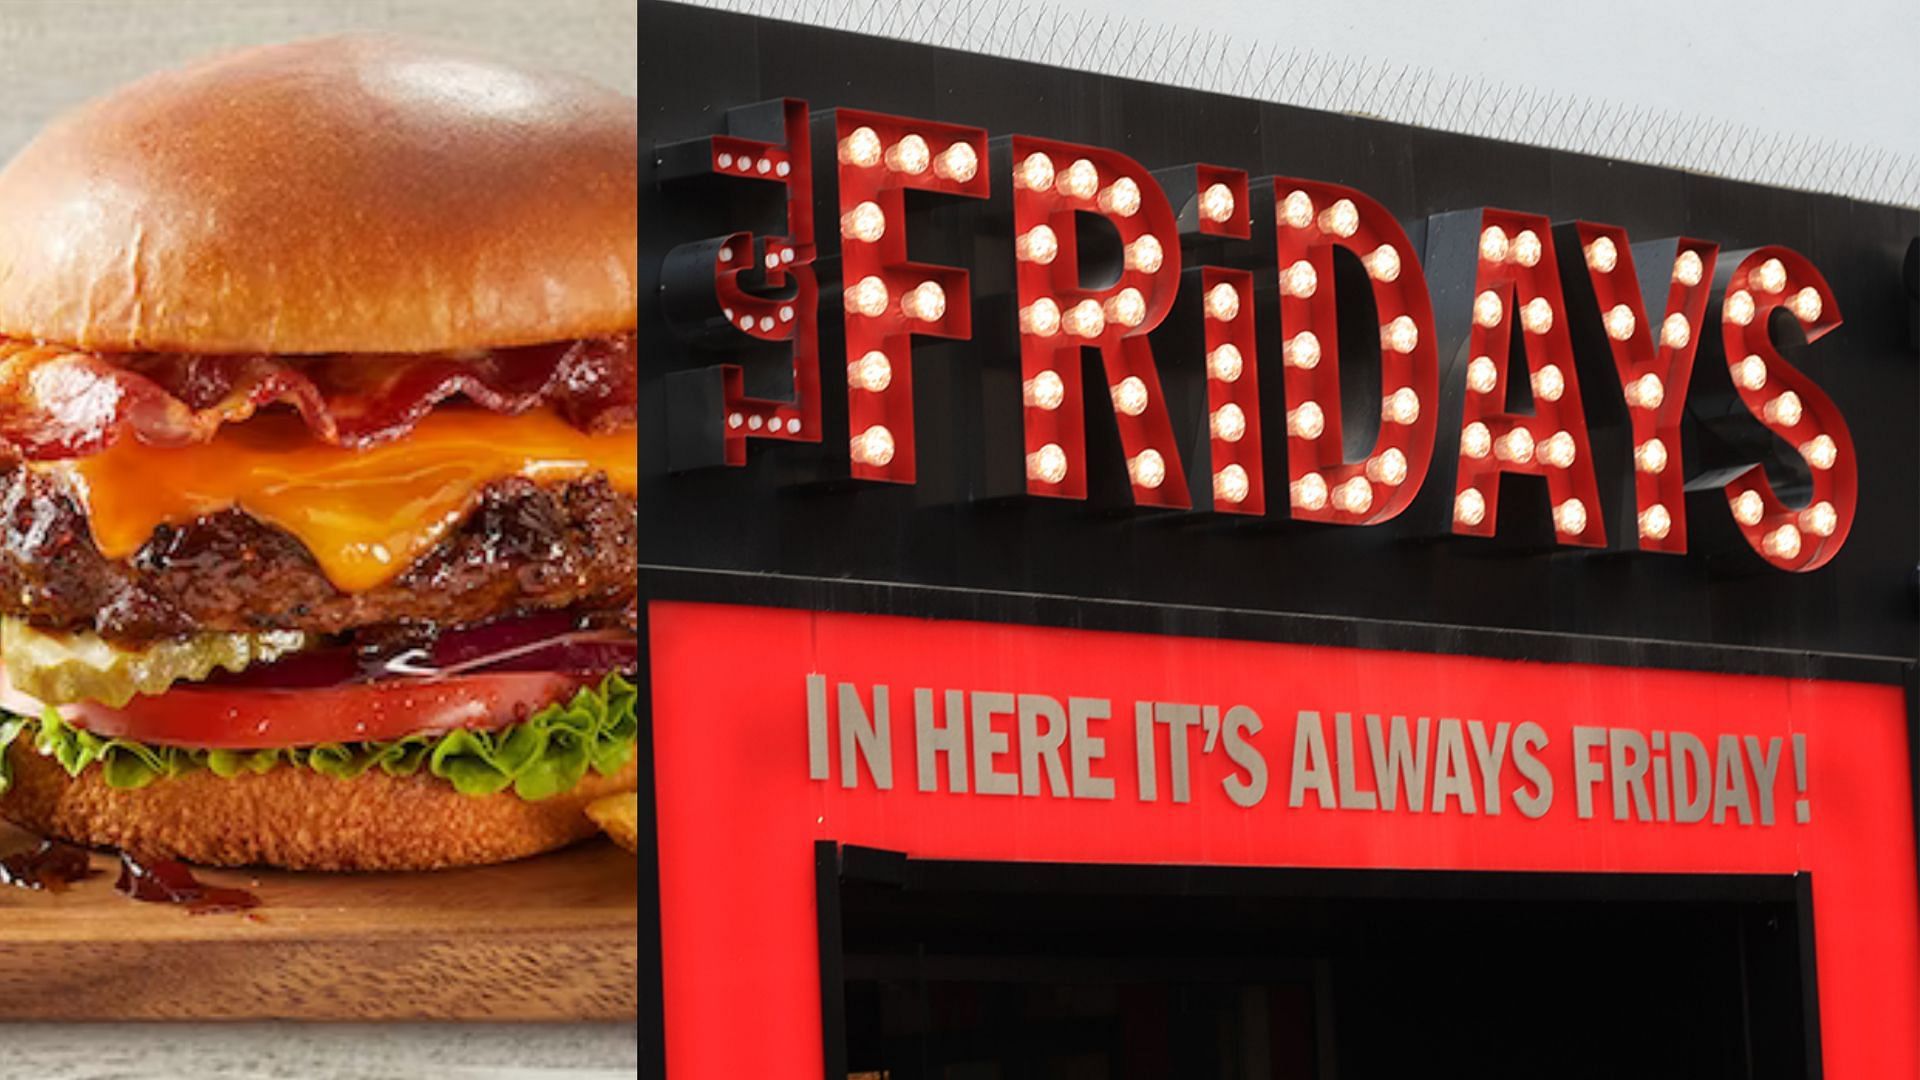 TGI Fridays has fresh deals to wrap up the year in deliciousness (Image via Mike Egerton/PA Images/GettyImages)